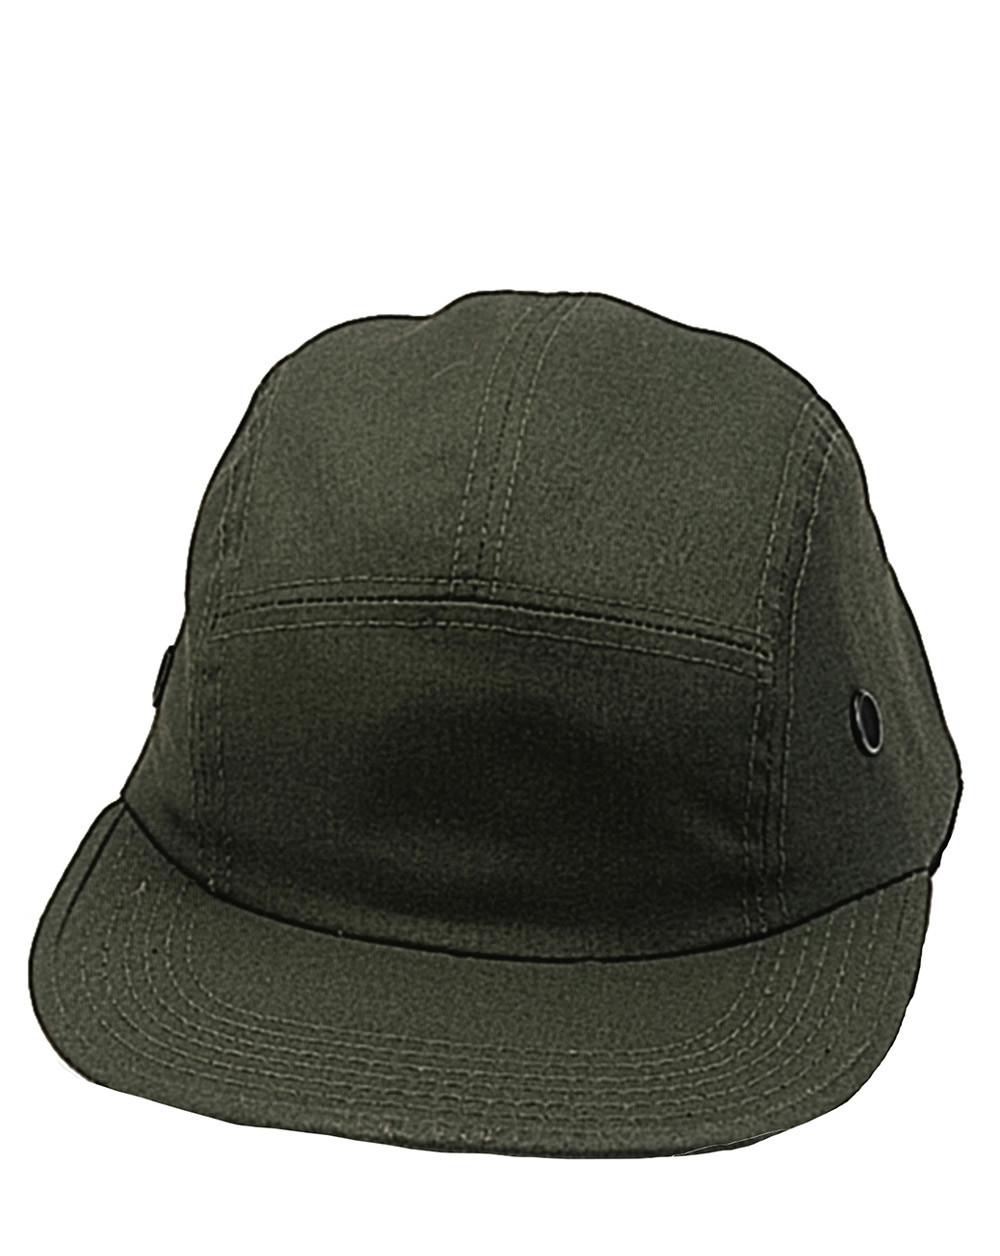 7: Rothco 5 Panel Military Street Cap (Oliven, One Size)